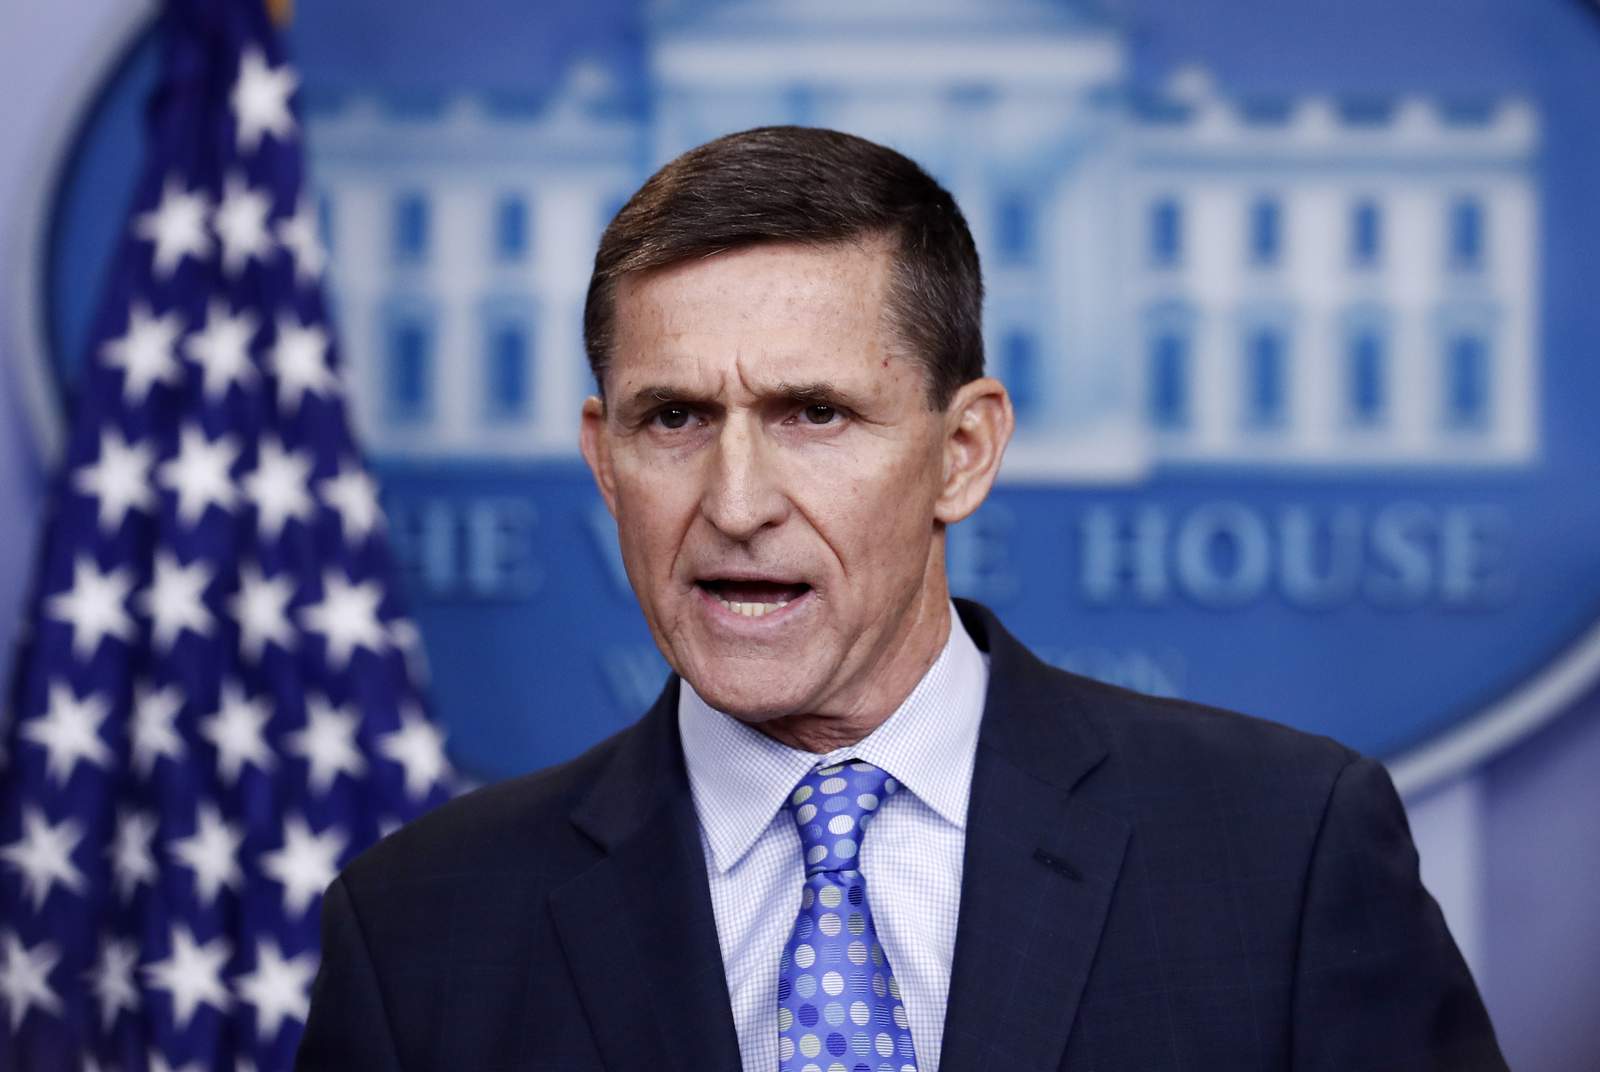 Appeals court seems wary of ordering dismissal of Flynn case